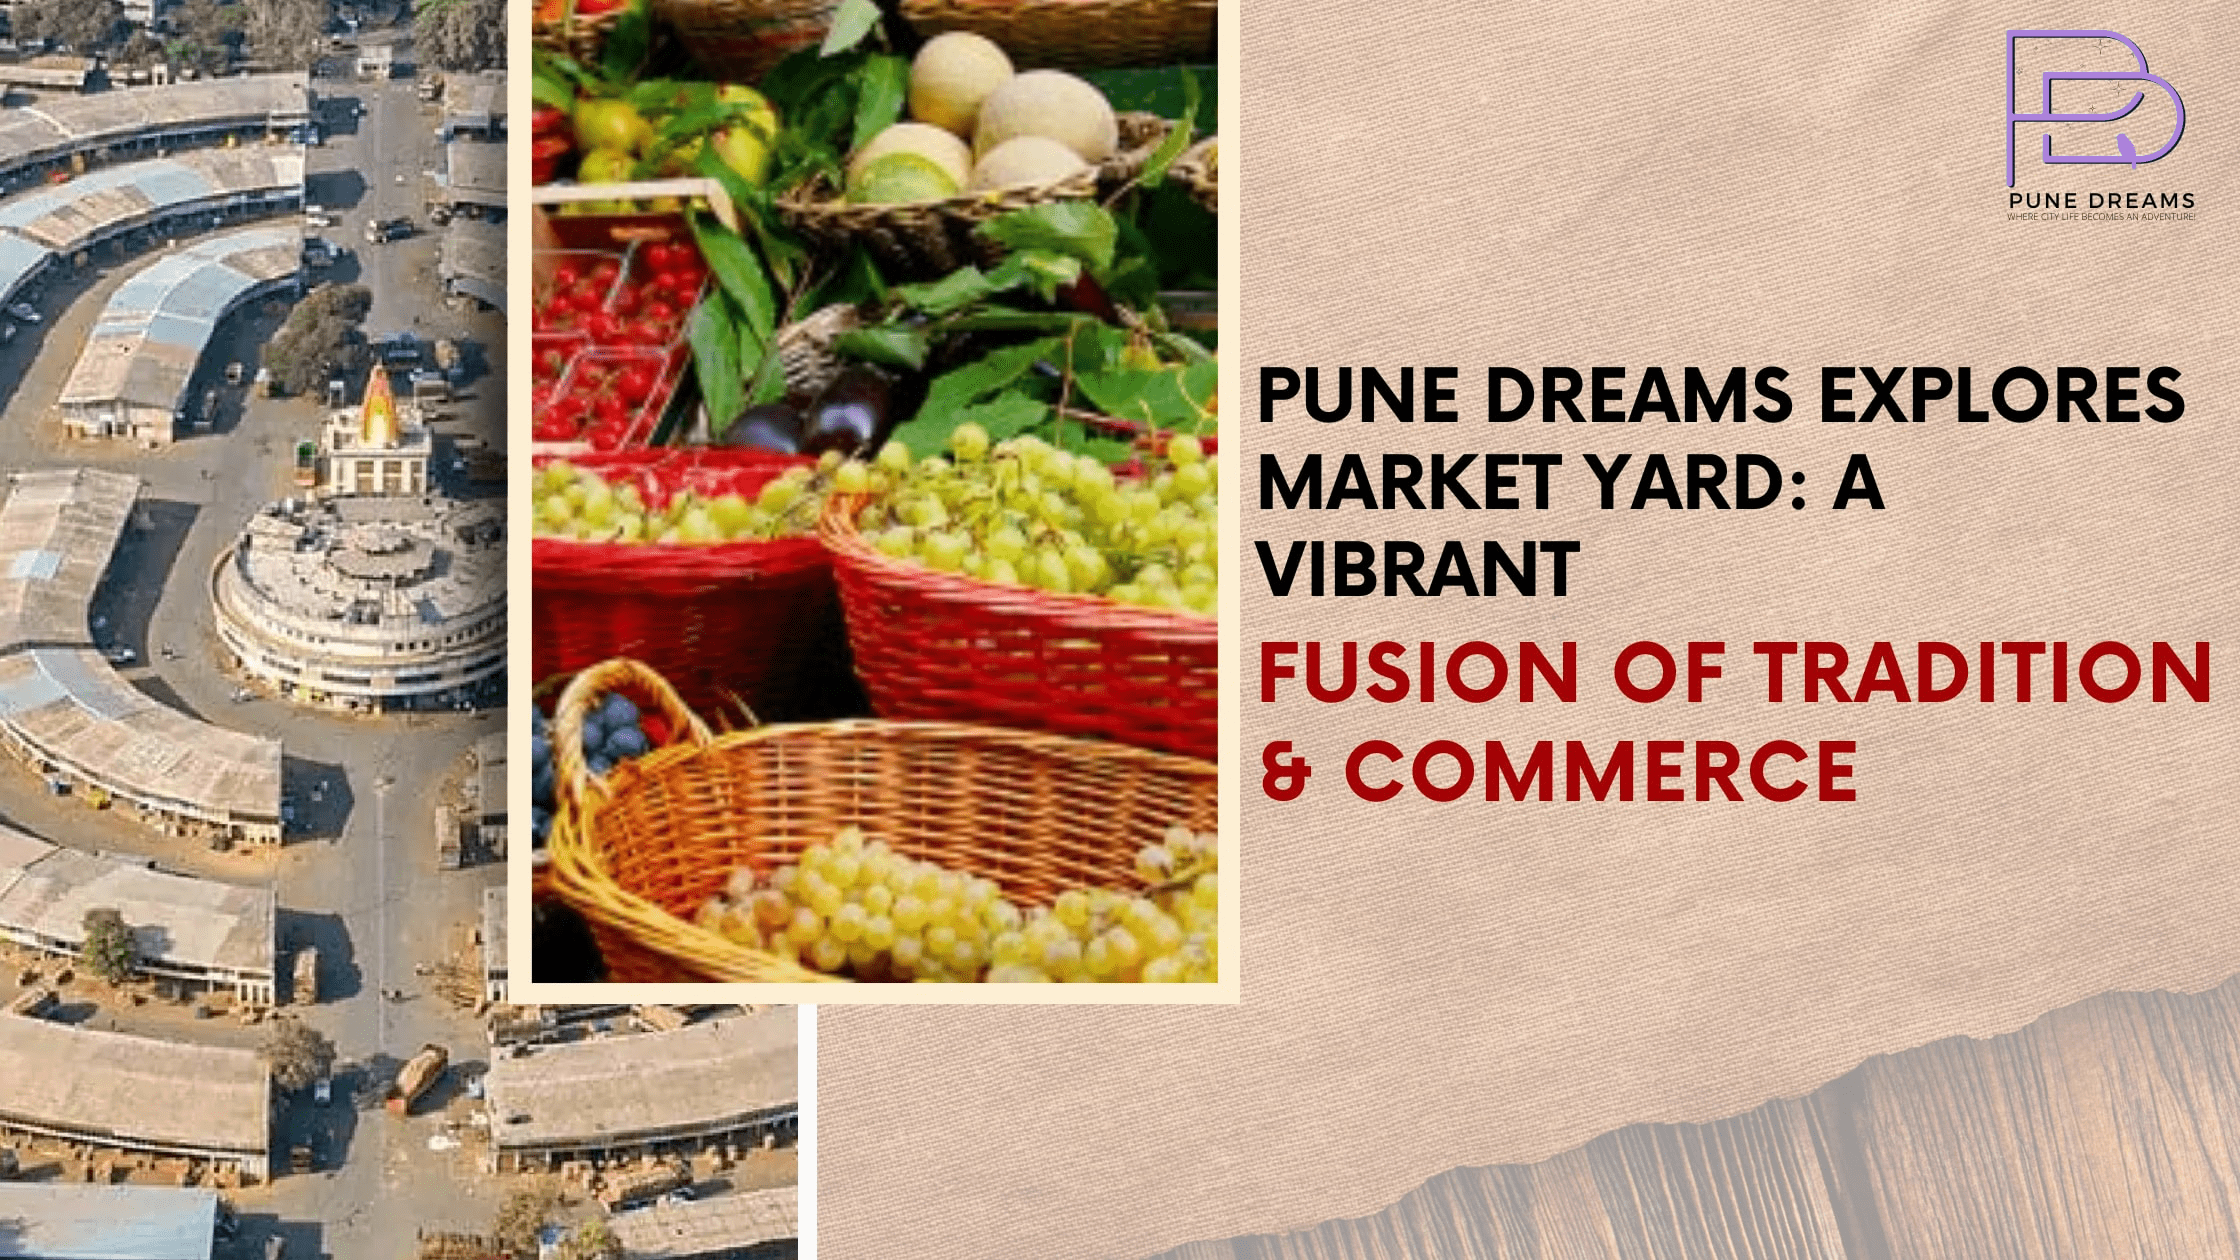 Pune Dreams Explores Market Yard: A Vibrant Fusion of Tradition and Commerce